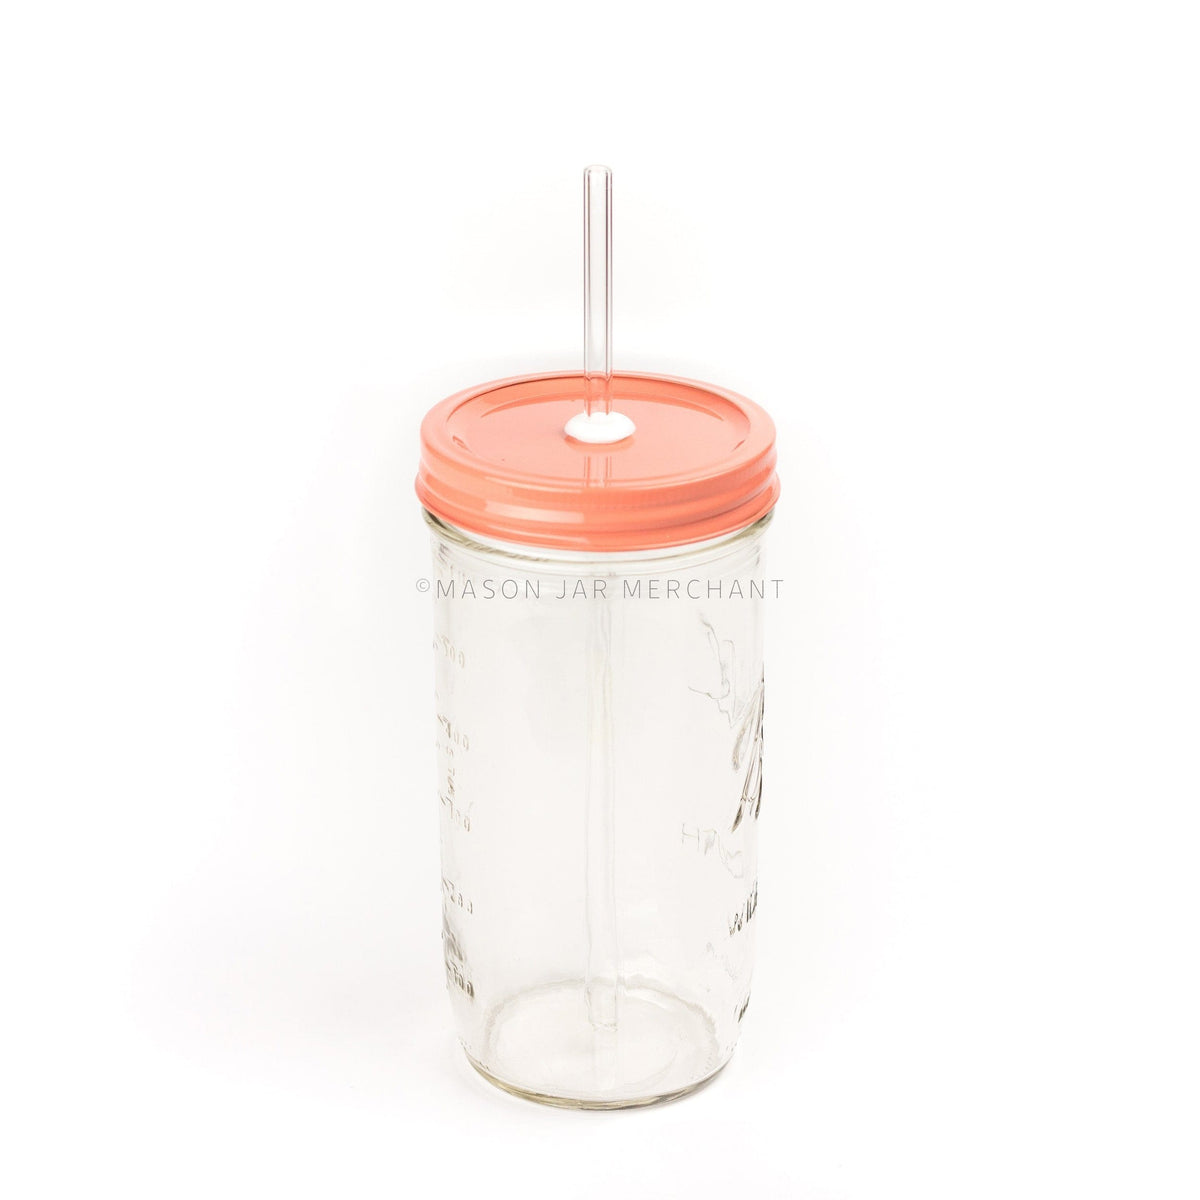 A 24 oz mason jar with a coral coloured painted straw lid and a glass straw against a white background